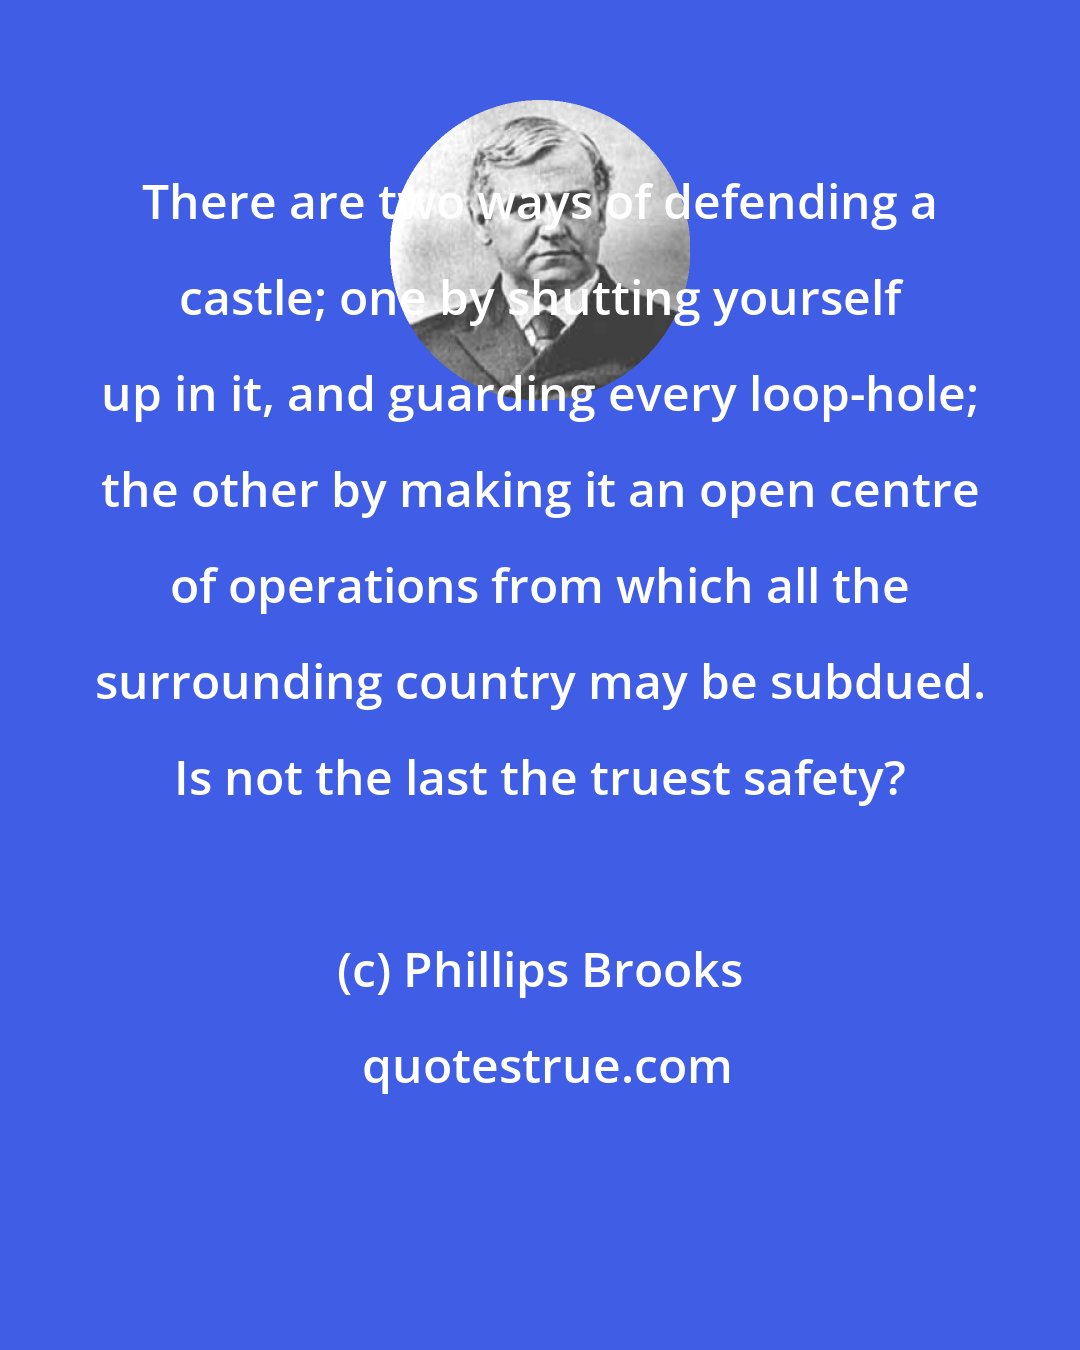 Phillips Brooks: There are two ways of defending a castle; one by shutting yourself up in it, and guarding every loop-hole; the other by making it an open centre of operations from which all the surrounding country may be subdued. Is not the last the truest safety?